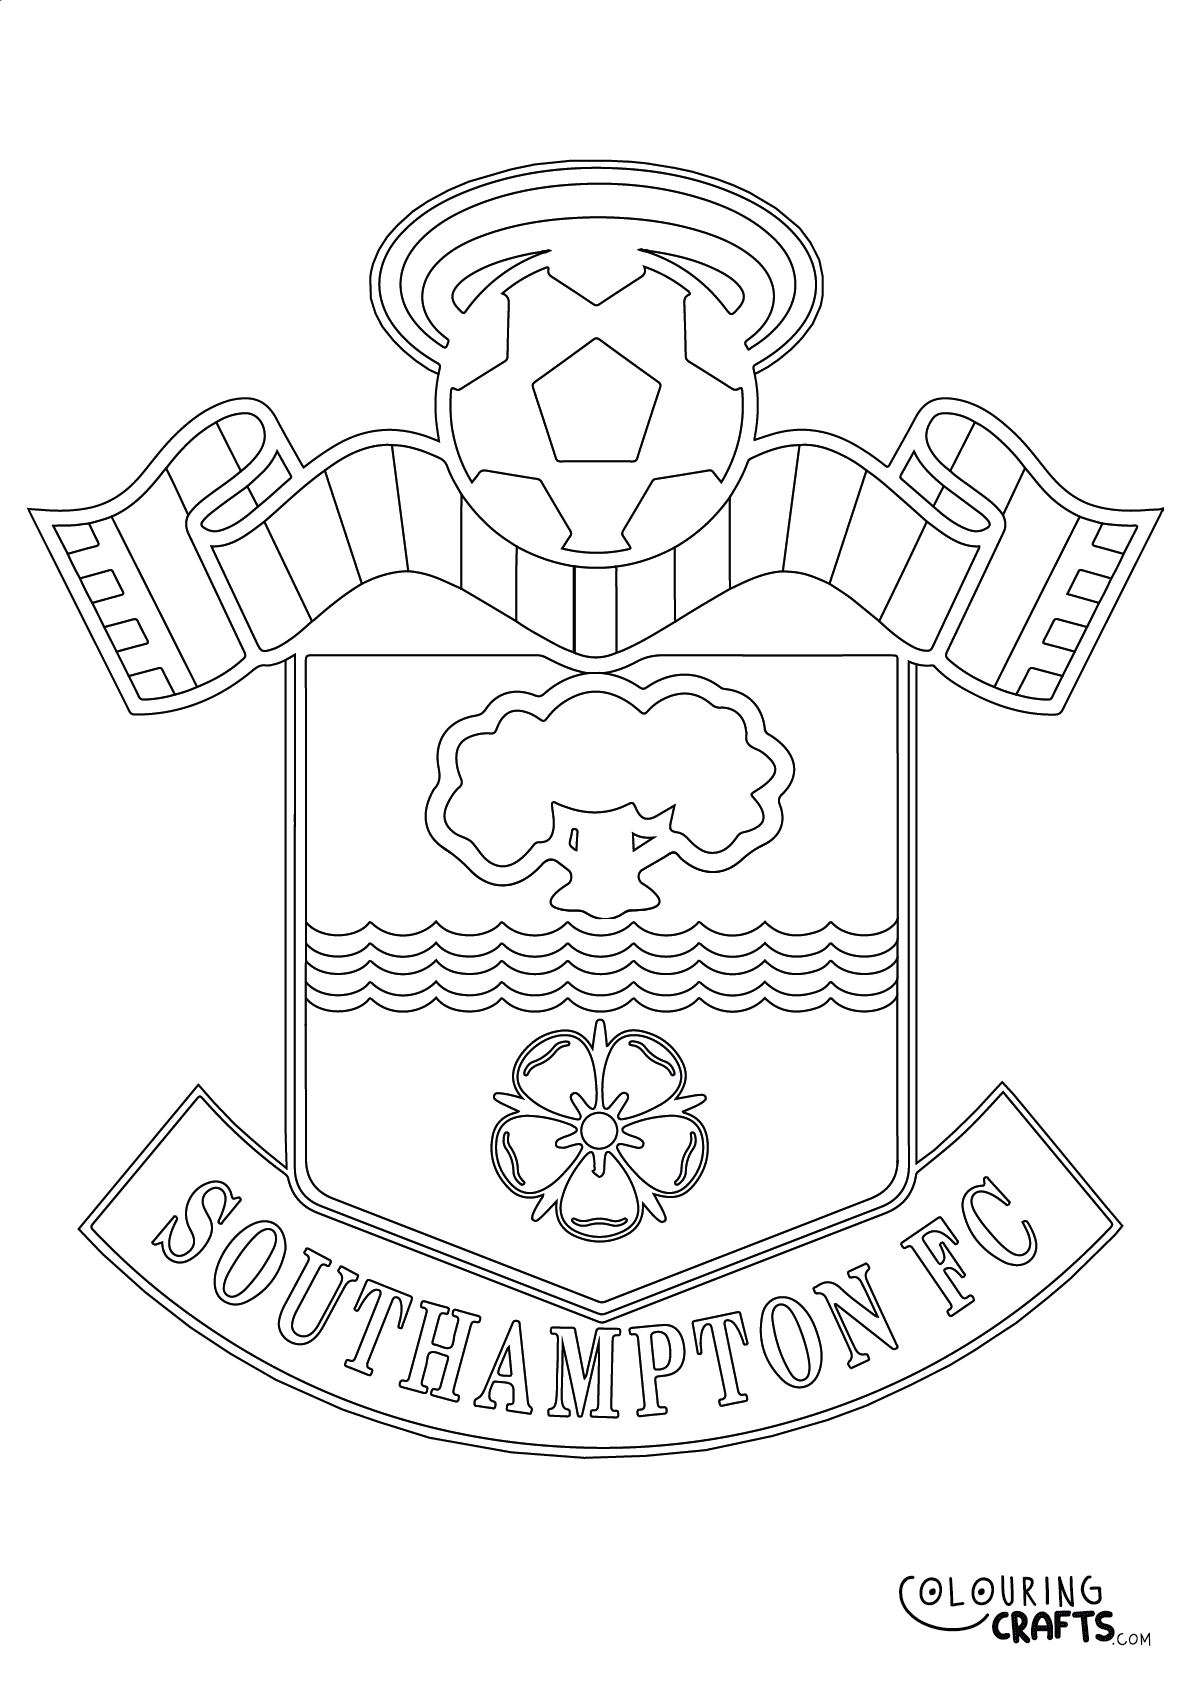 Southampton FC Badge Printable Colouring Page - Colouring Crafts